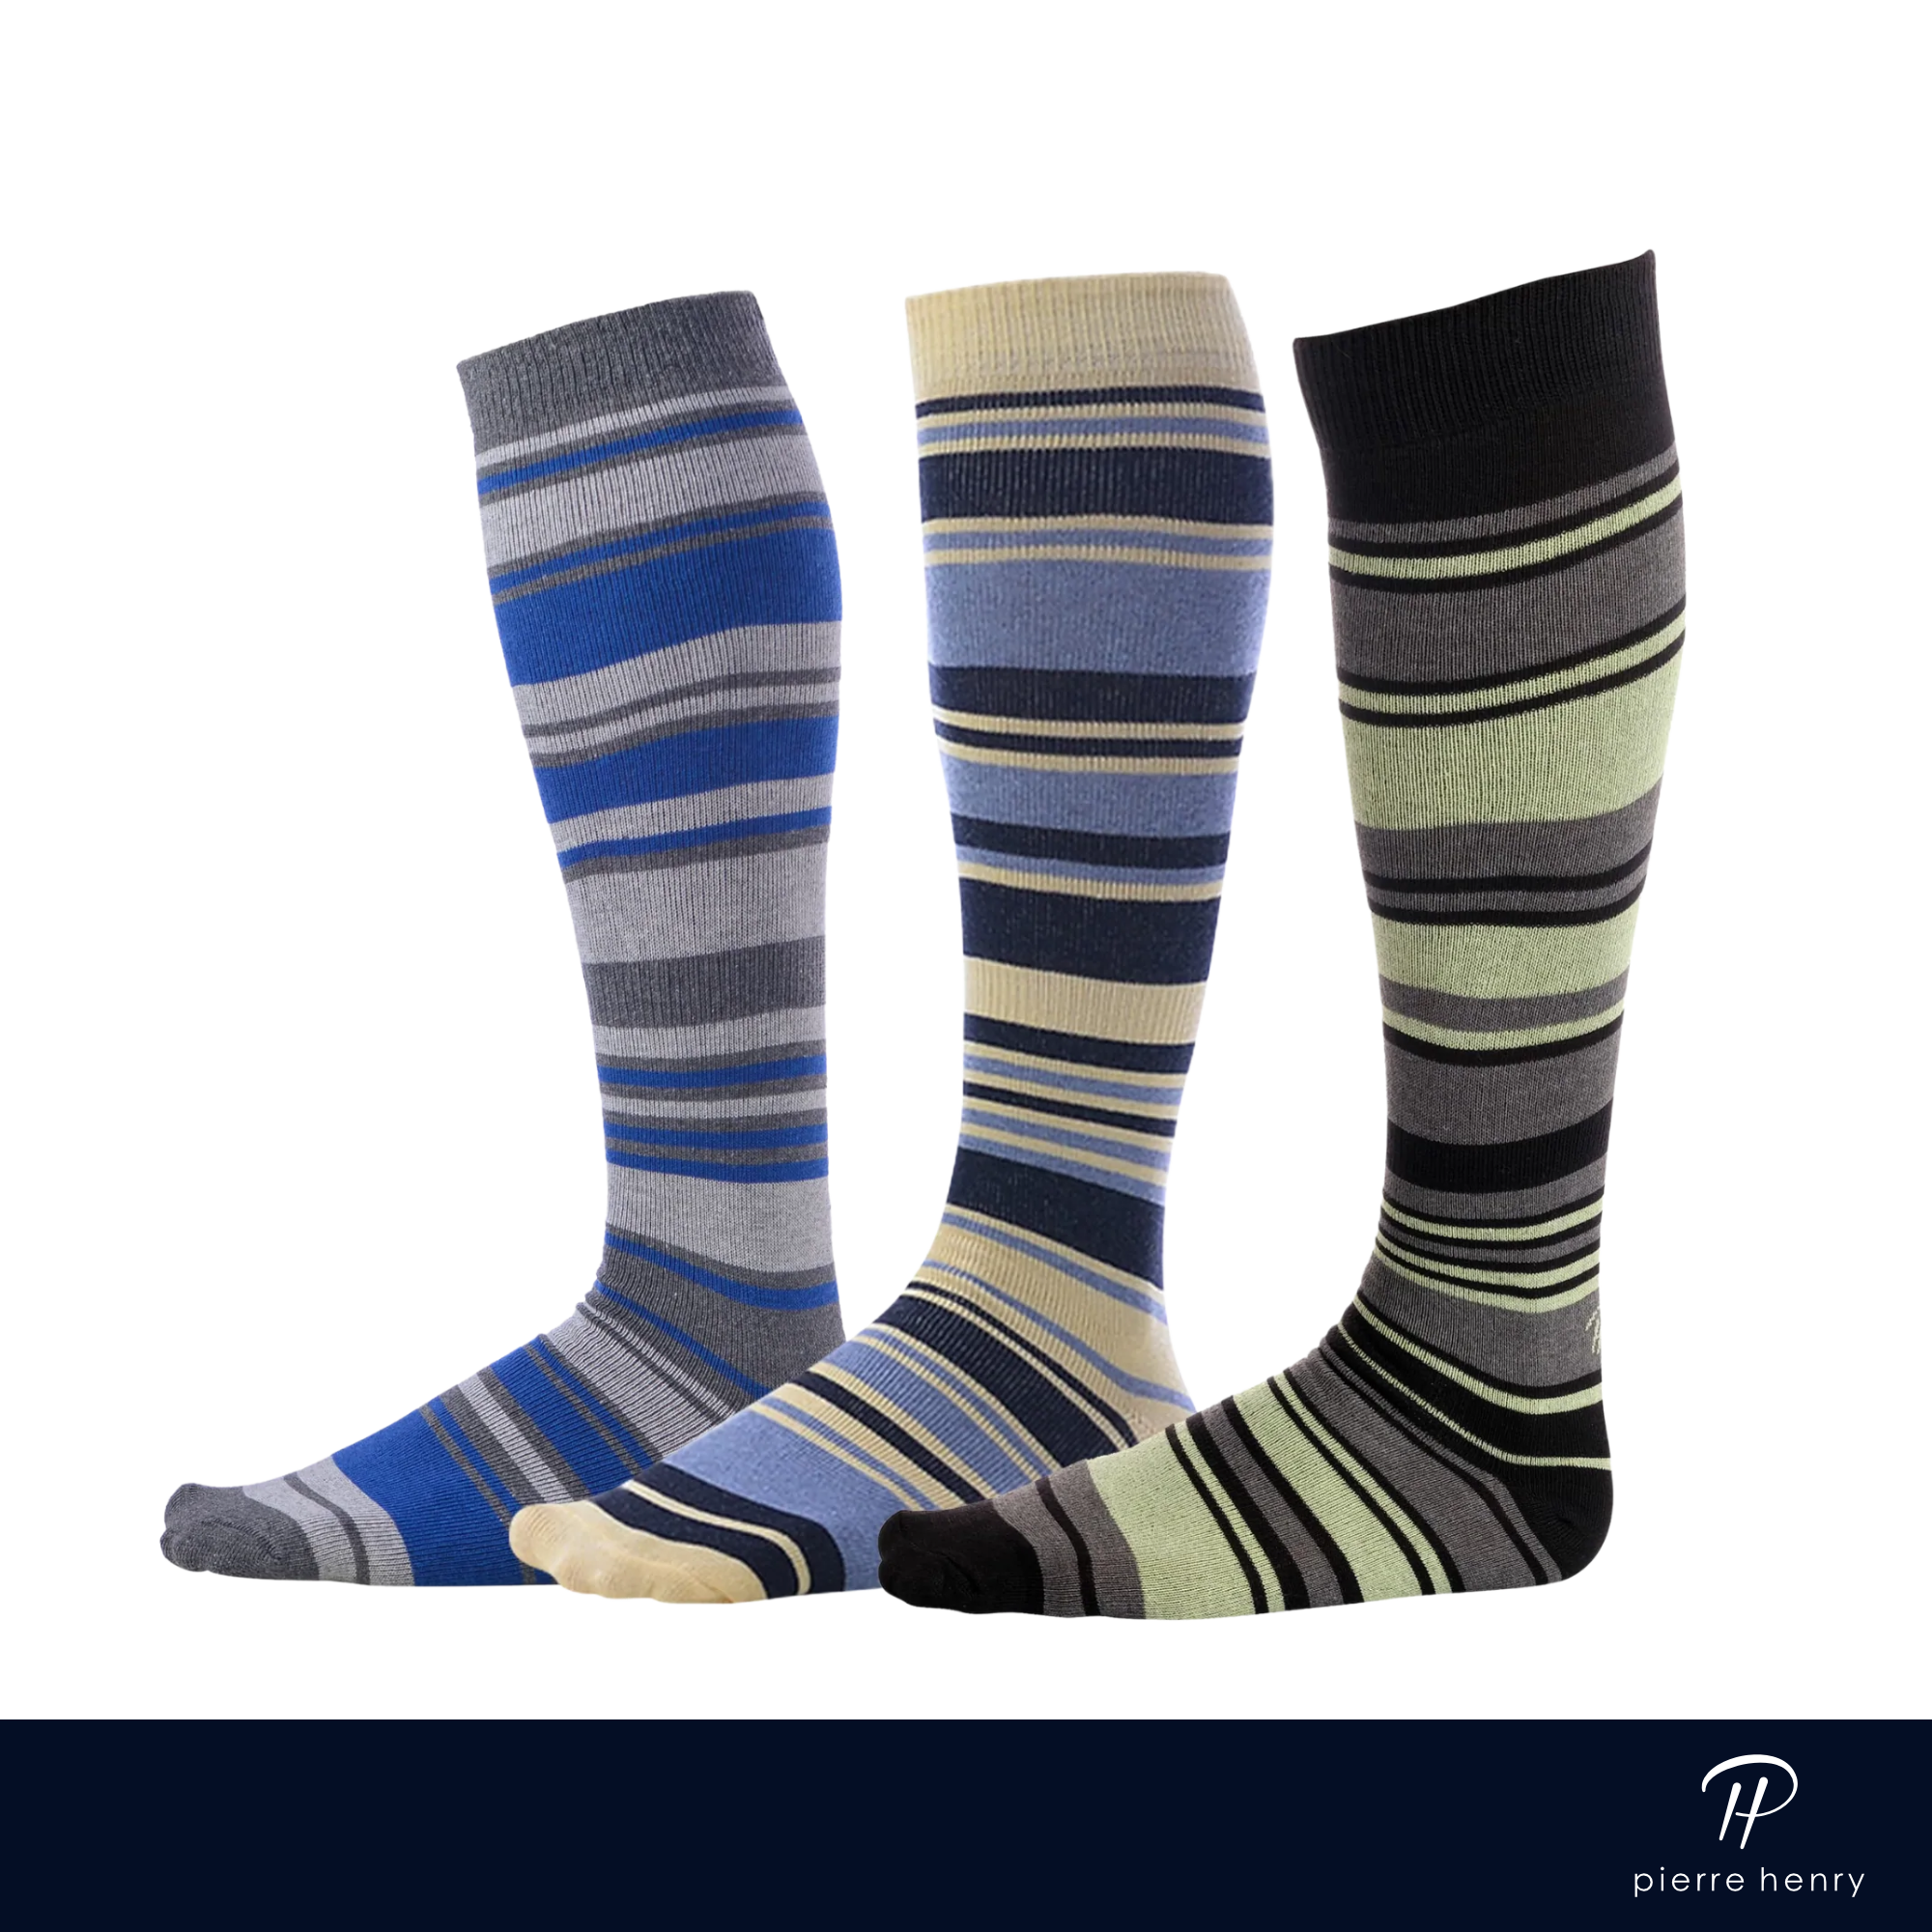 blue and grey over the calf dress socks, beige navy and light blue over the calf dress socks, black grey and jade lime over the calf dress socks